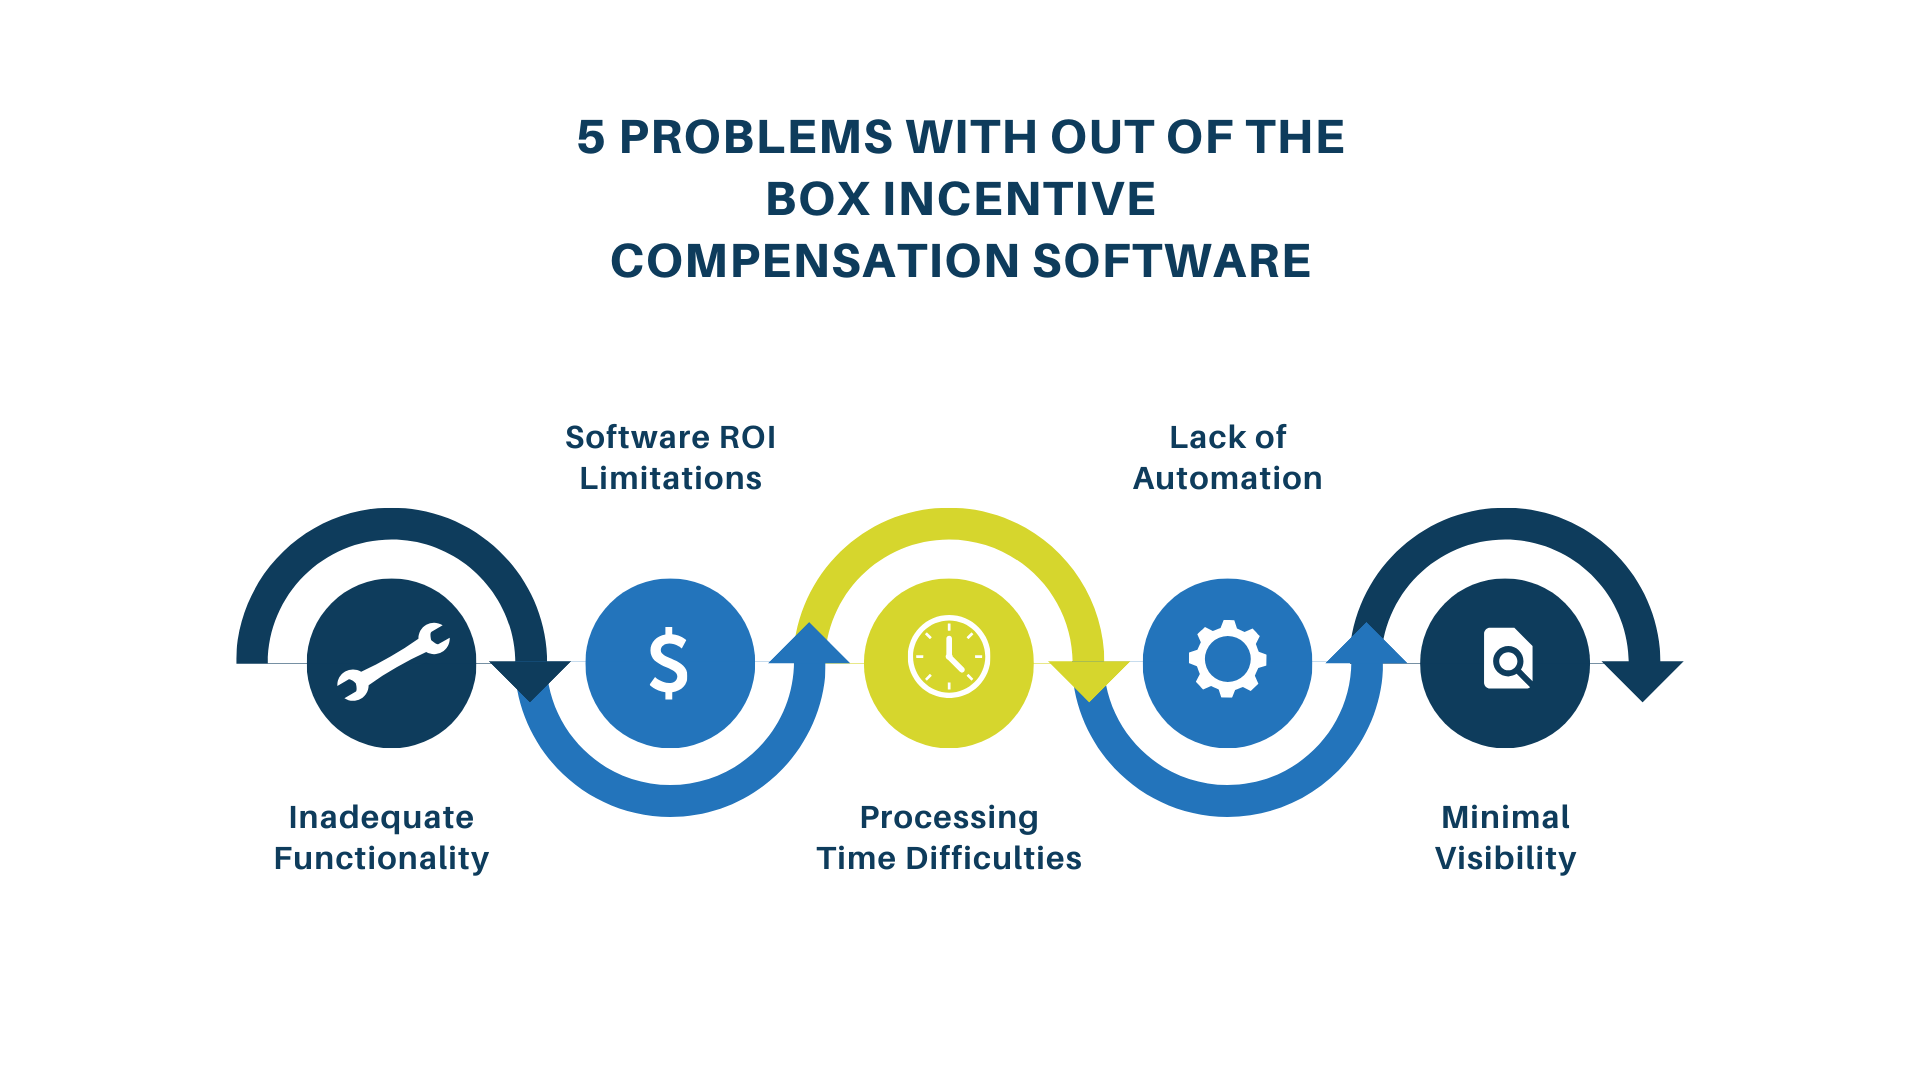 5 problems with out of the box incentive compensation software